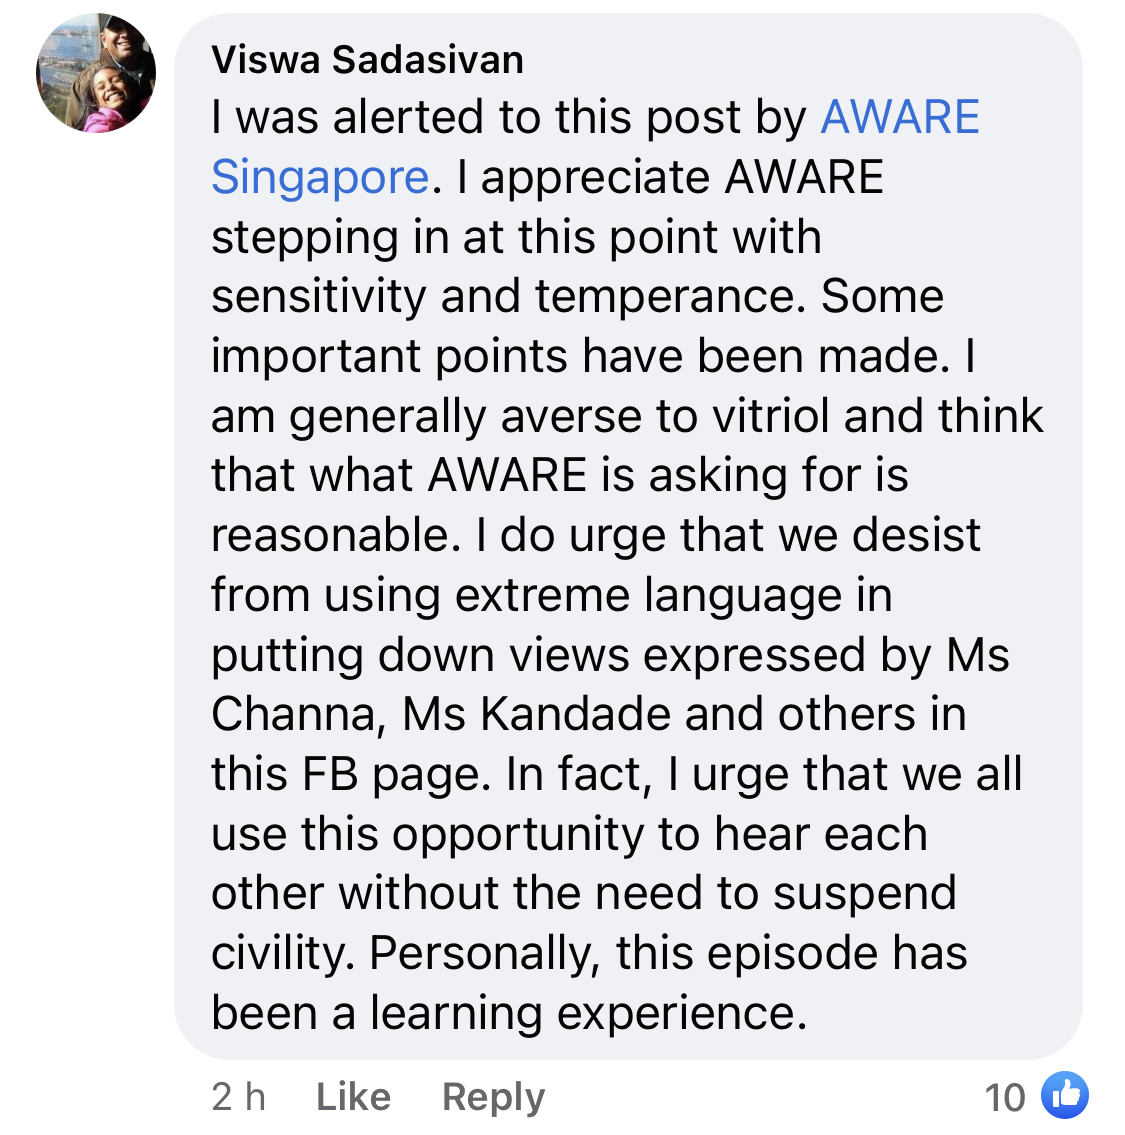 Image of Viswa's comment